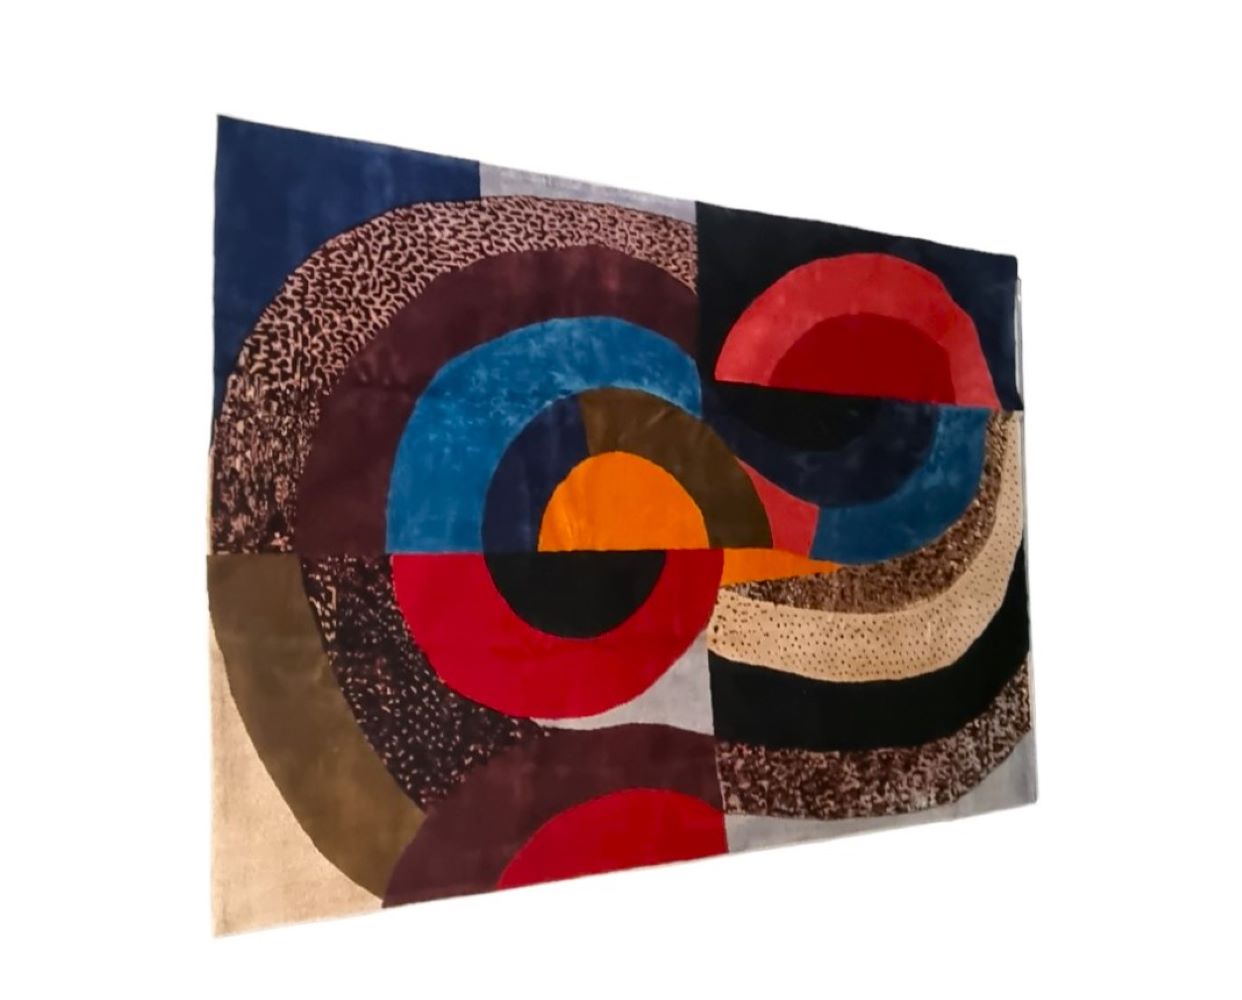 Sonia DELAUNAY "Hippocampe" Colored wool carpet, circa 1970. - Image 2 of 5